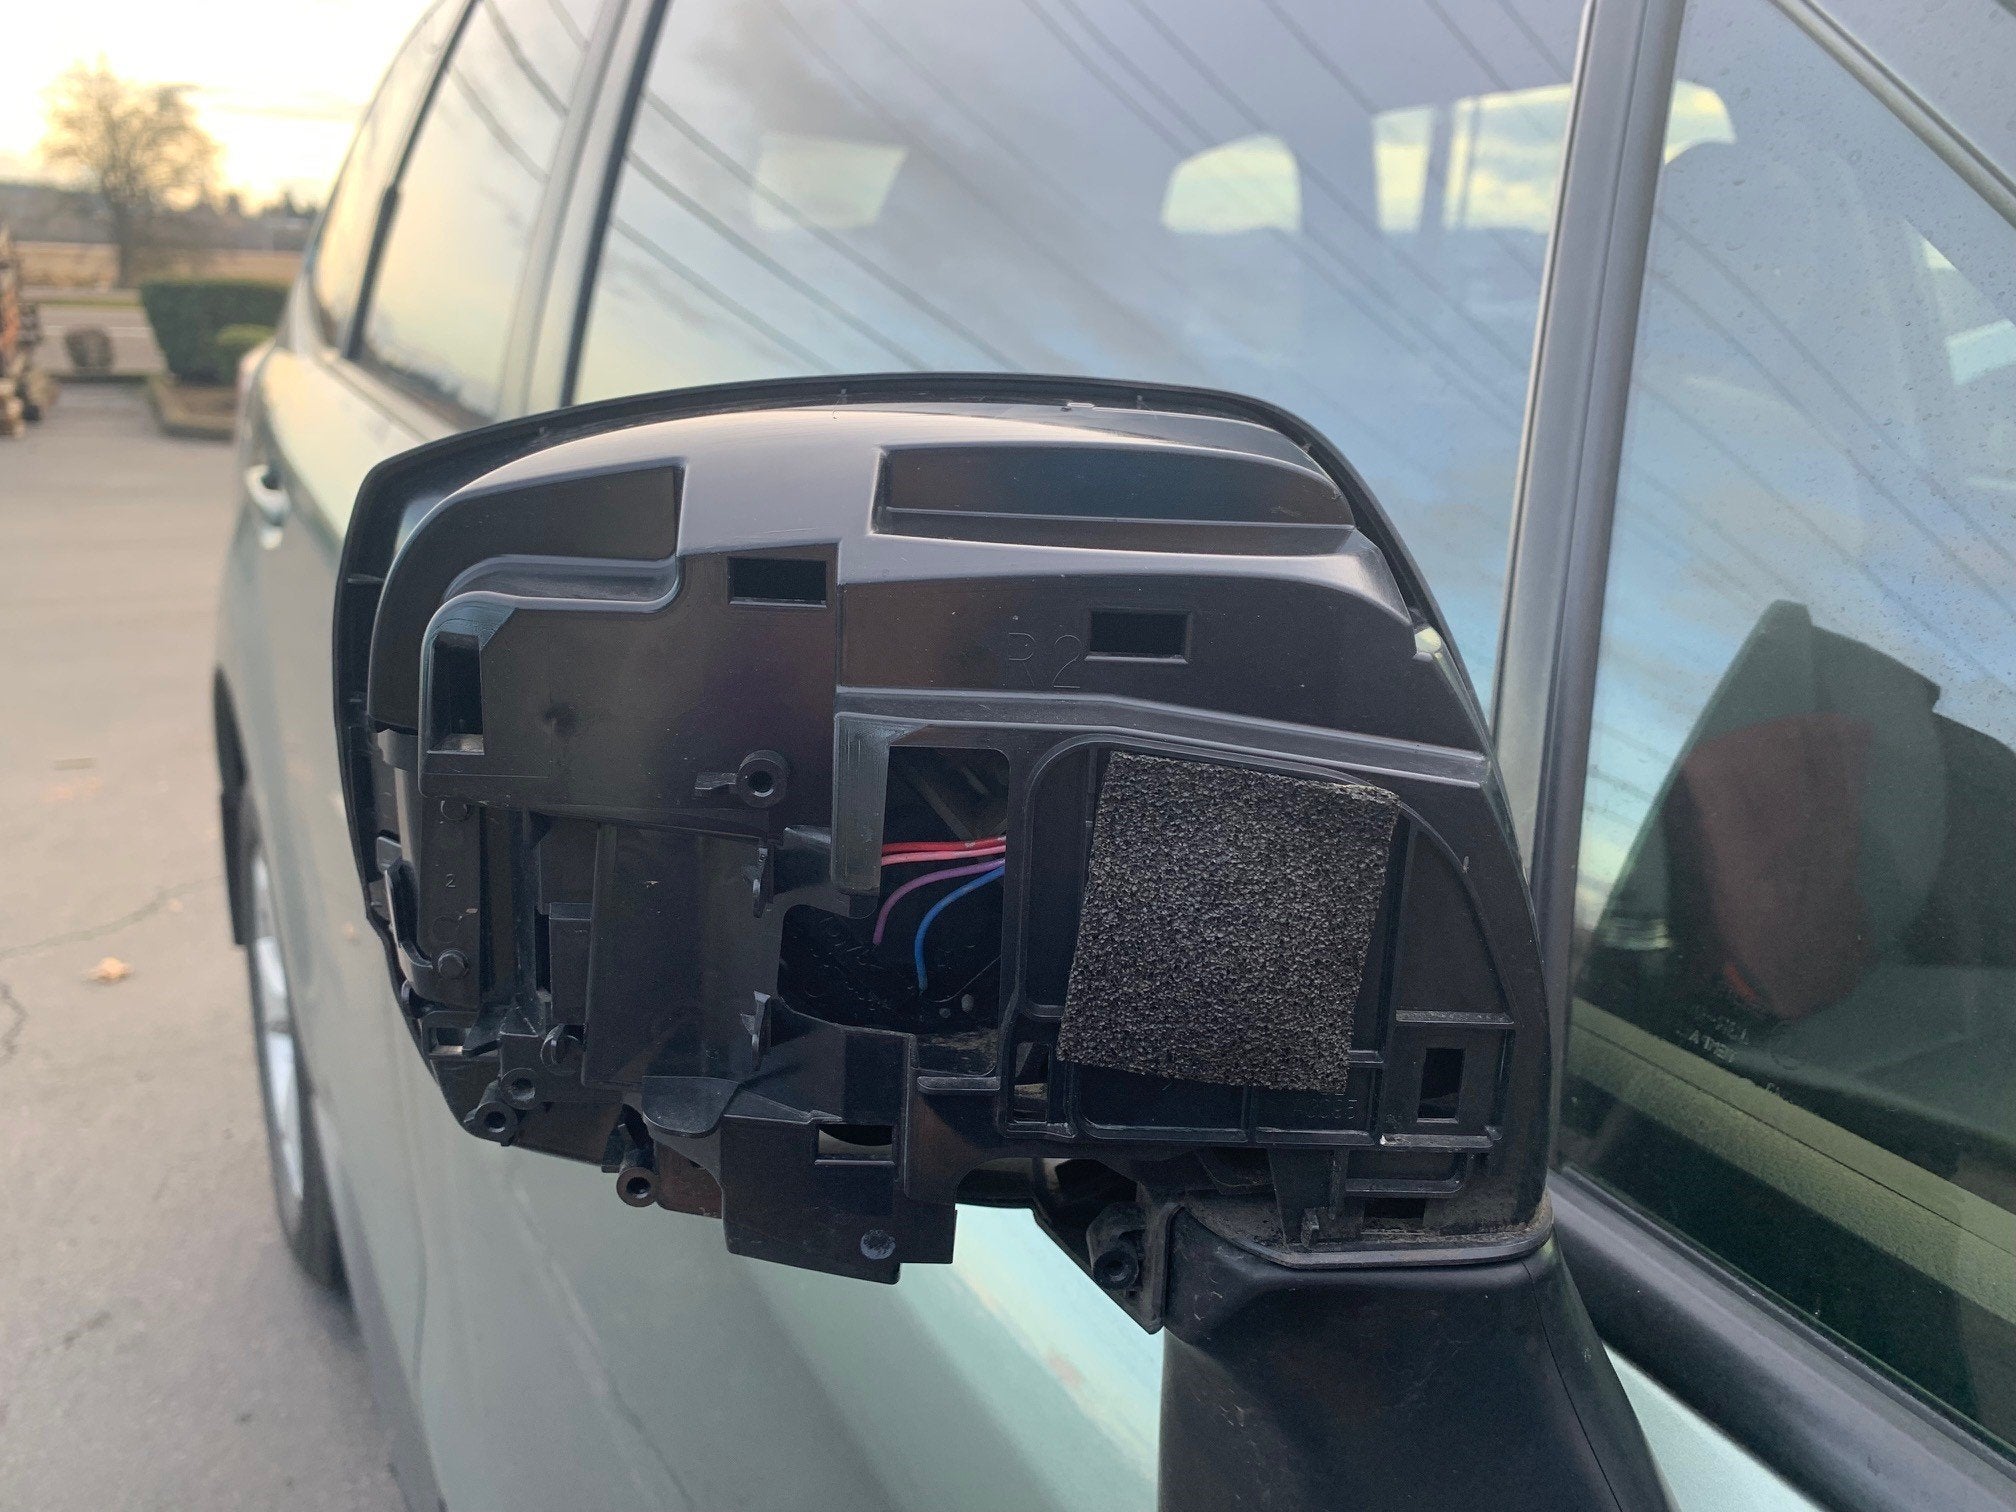 https://www.subaruforester.org/attachments/forester-mirror-housing-missing-jpg.590576/